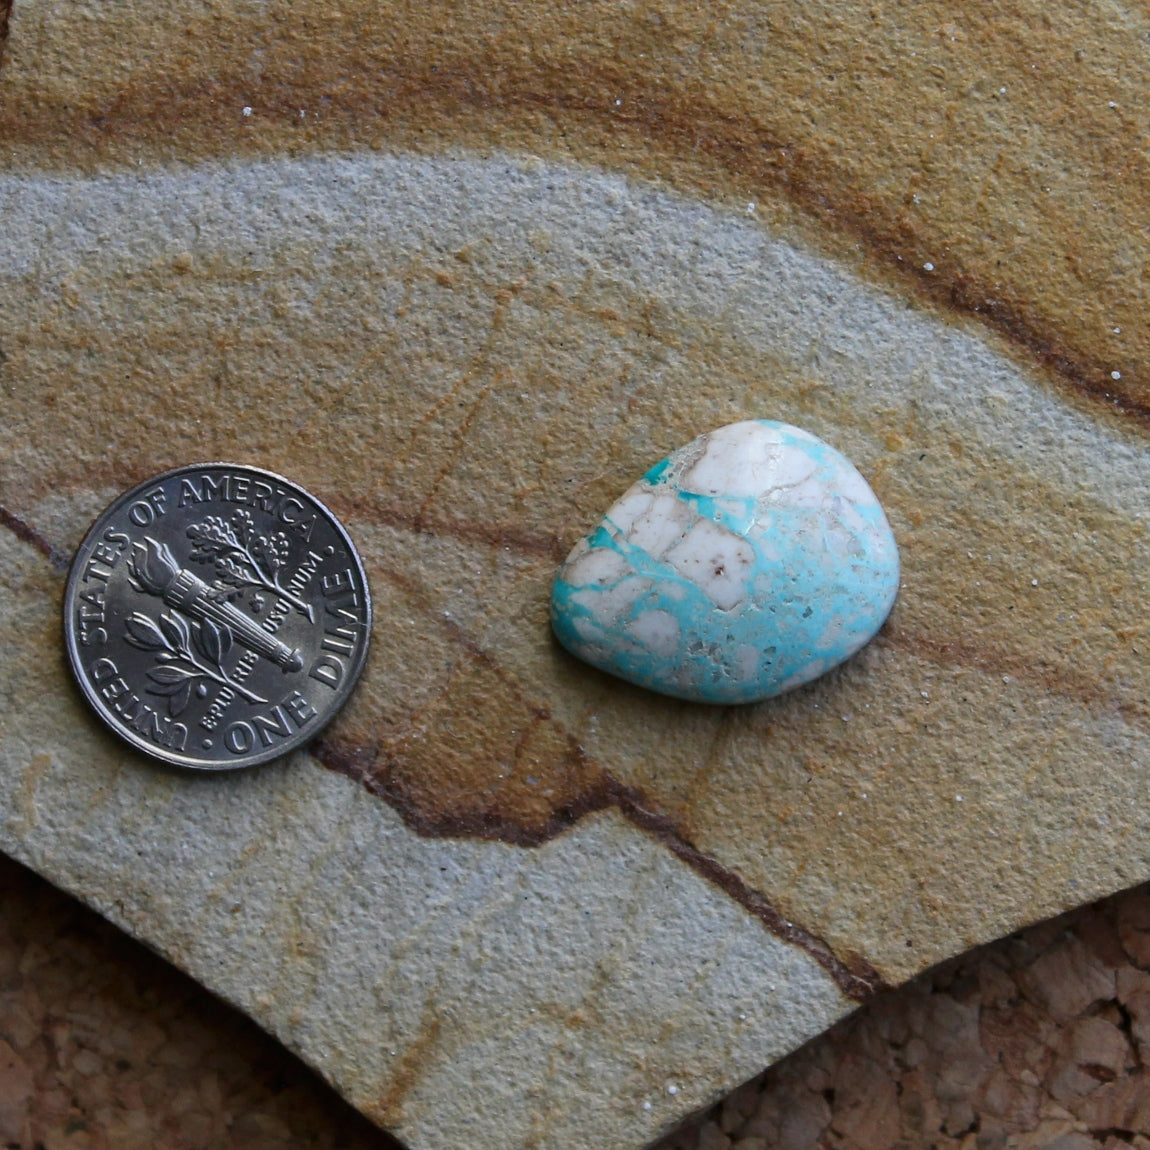 10.1 carat icy blue boulder-cut Stone Mountain Turquoise cabochon